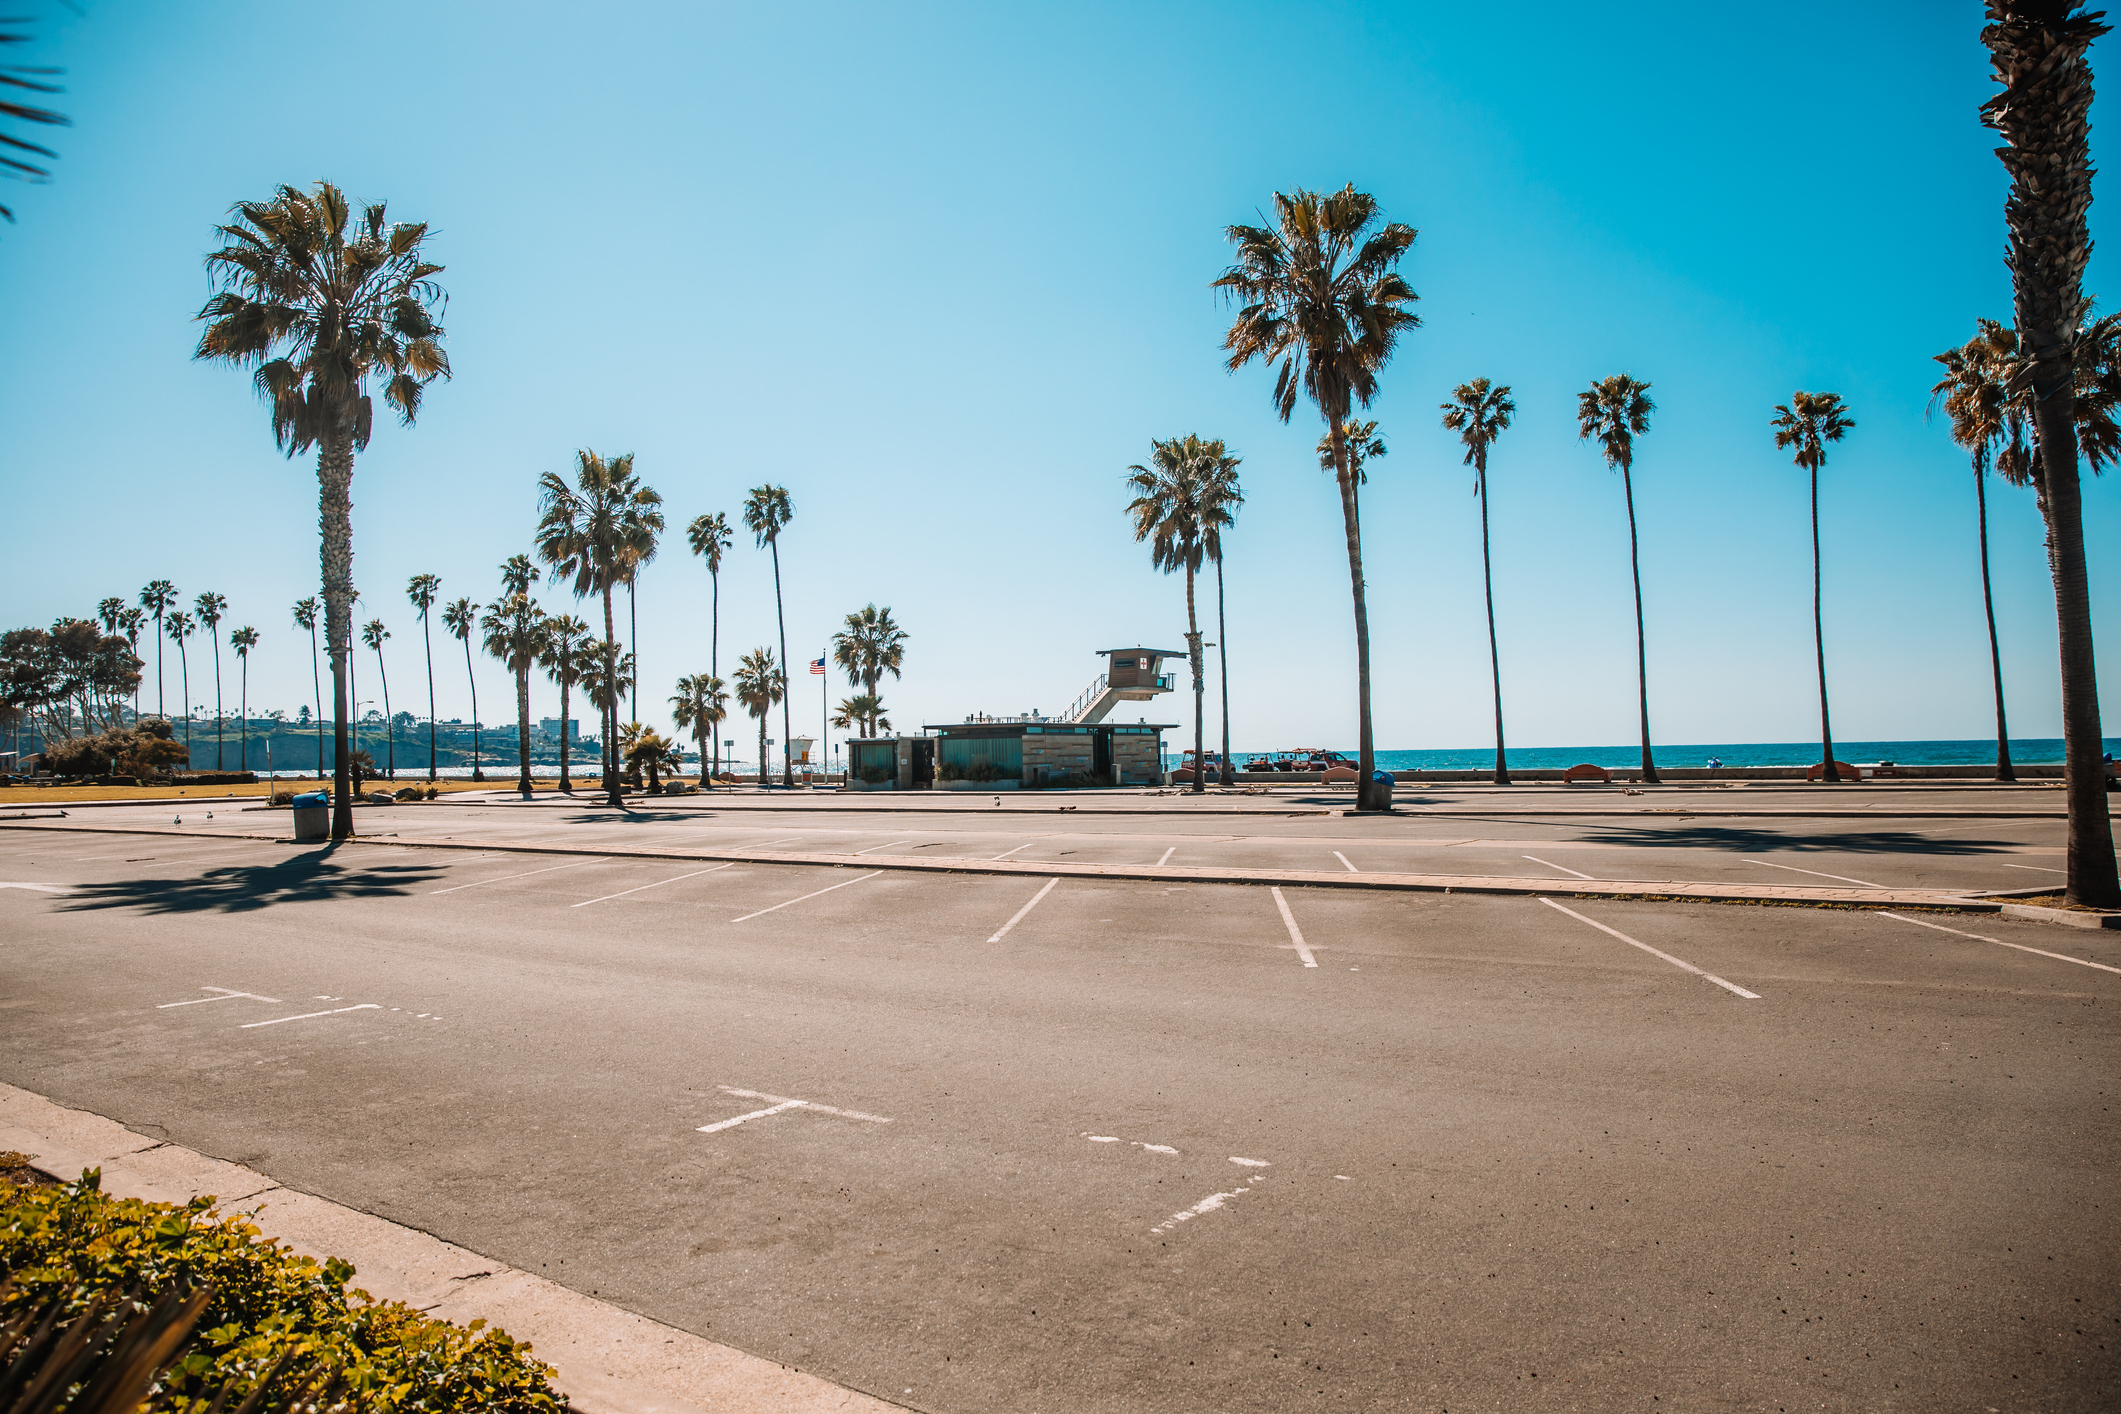 A parking lot in San Diego, Calif., during the COVID-19 lockdown of March 2020. (Getty Images)